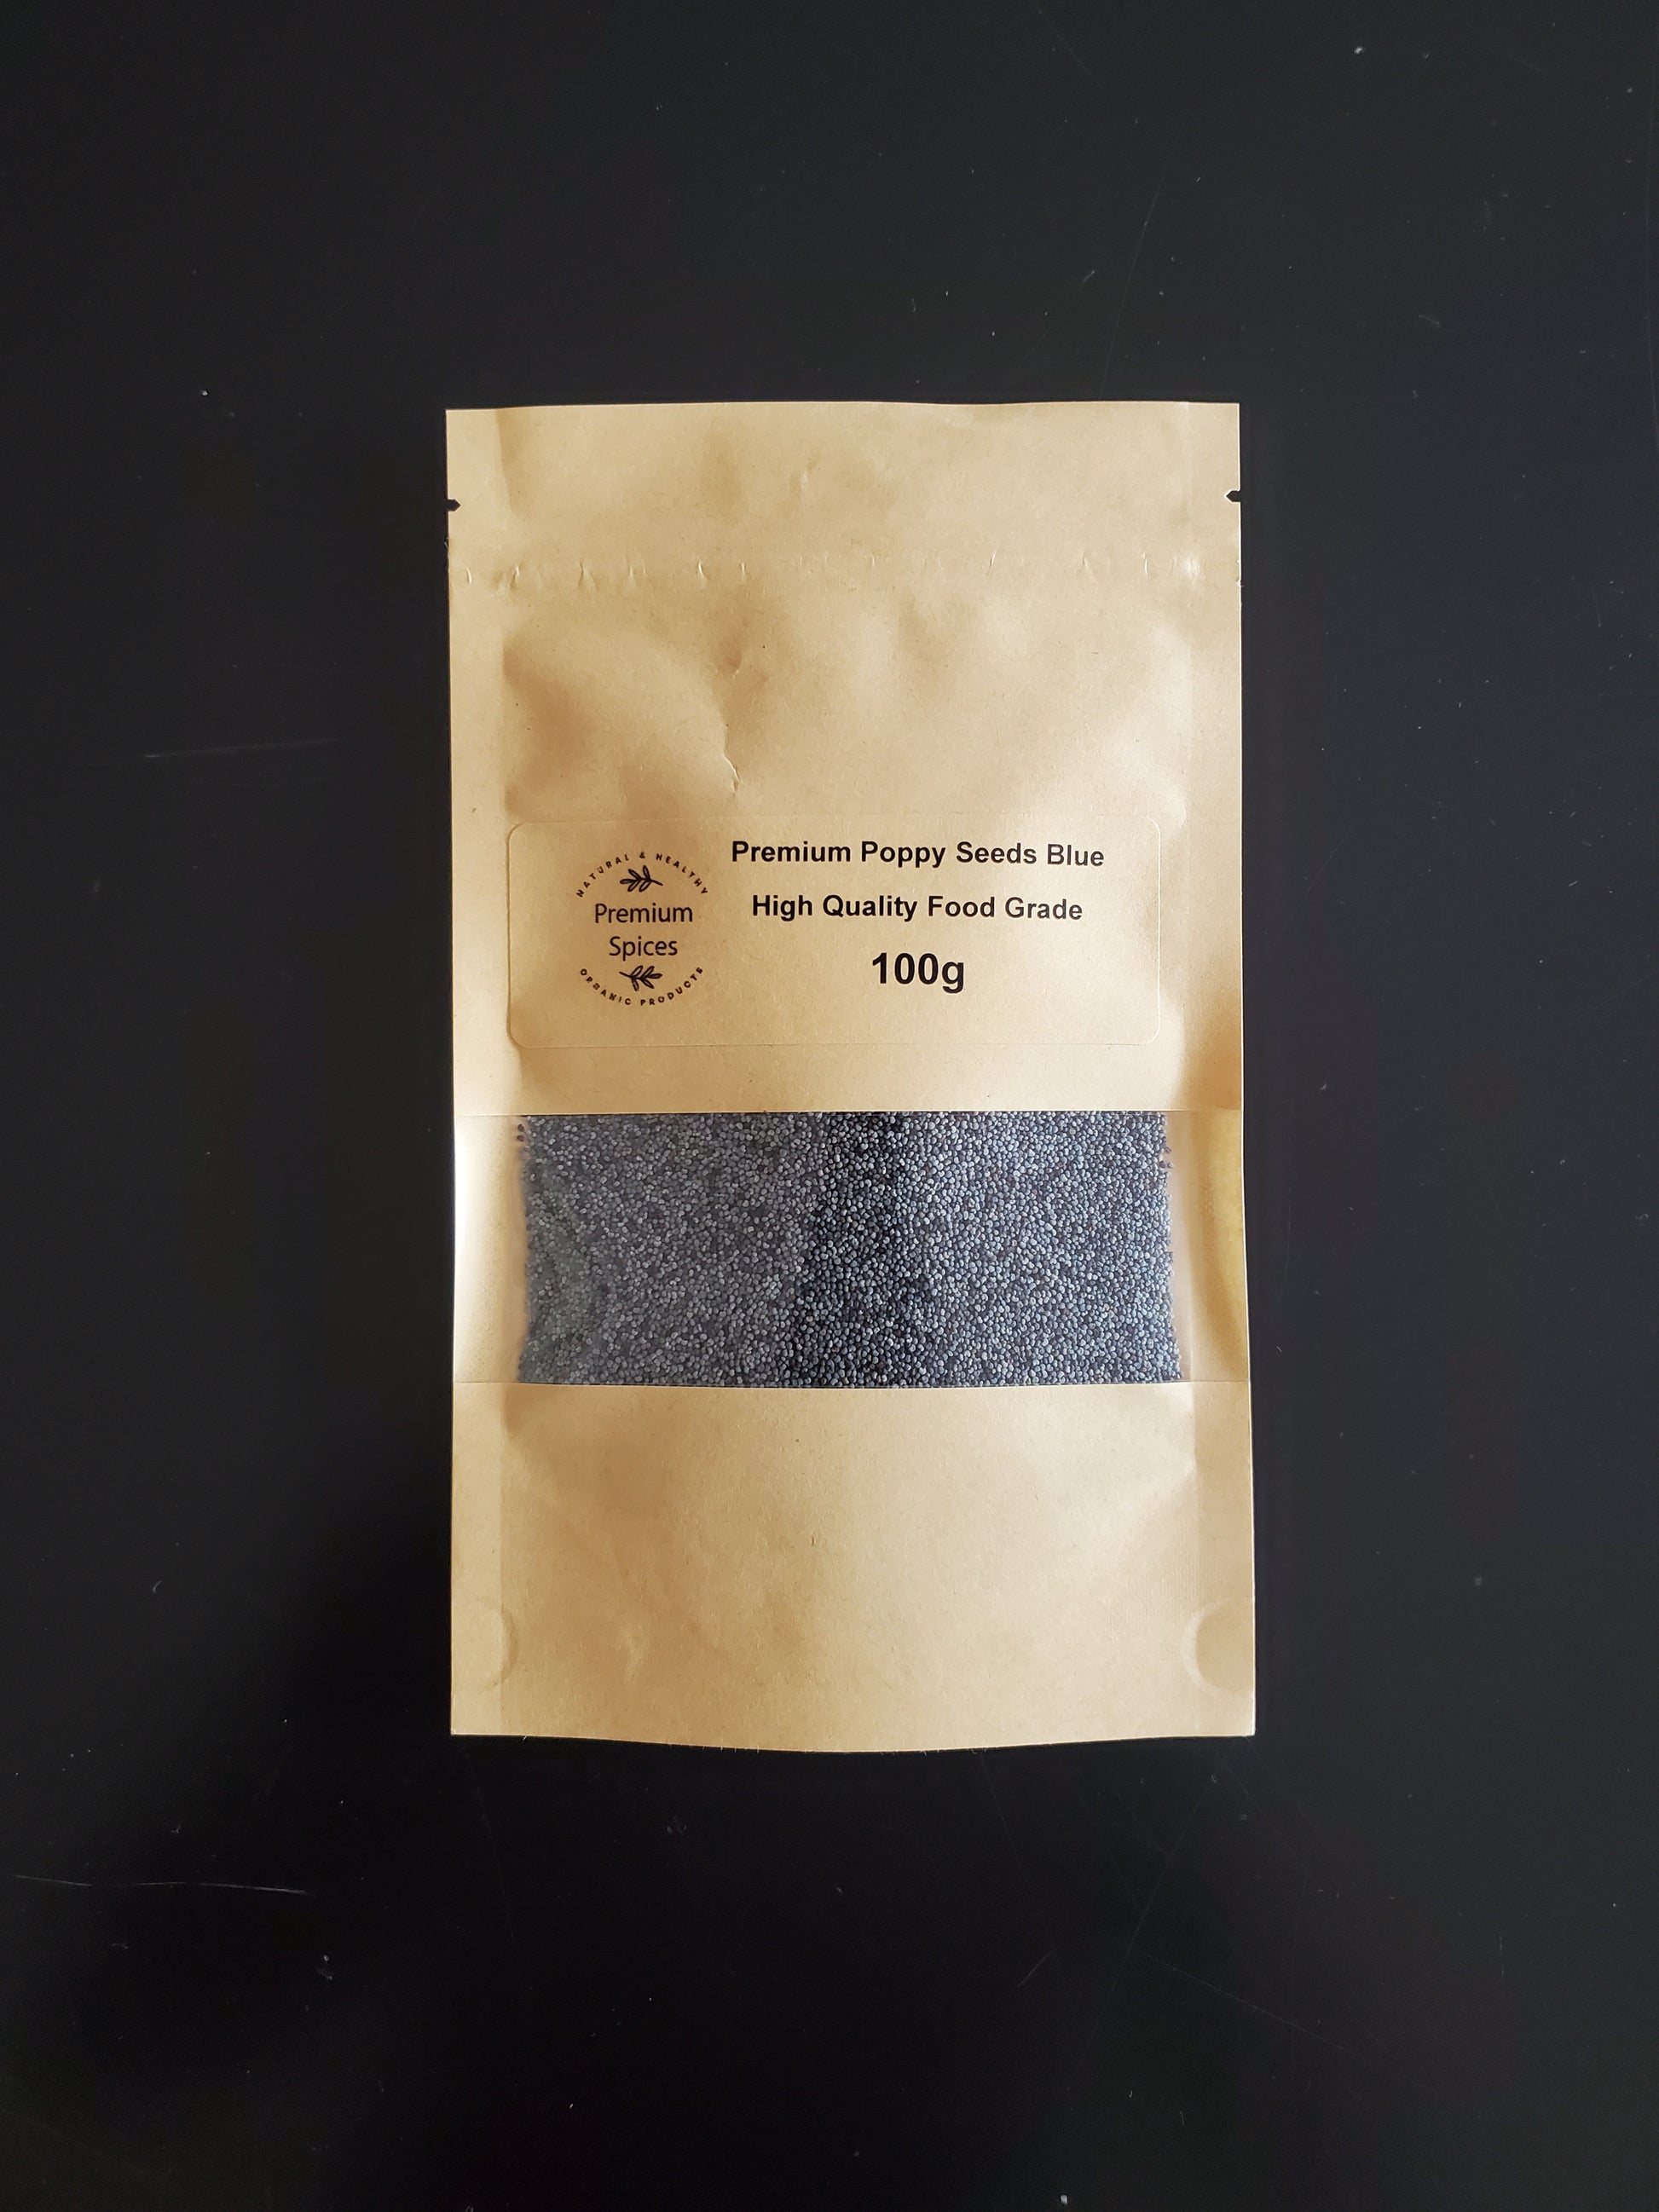 Premium Blue Poppy Seeds NZ, Best PRICE & QUALITY from Premium Spices, showing 100g Pack